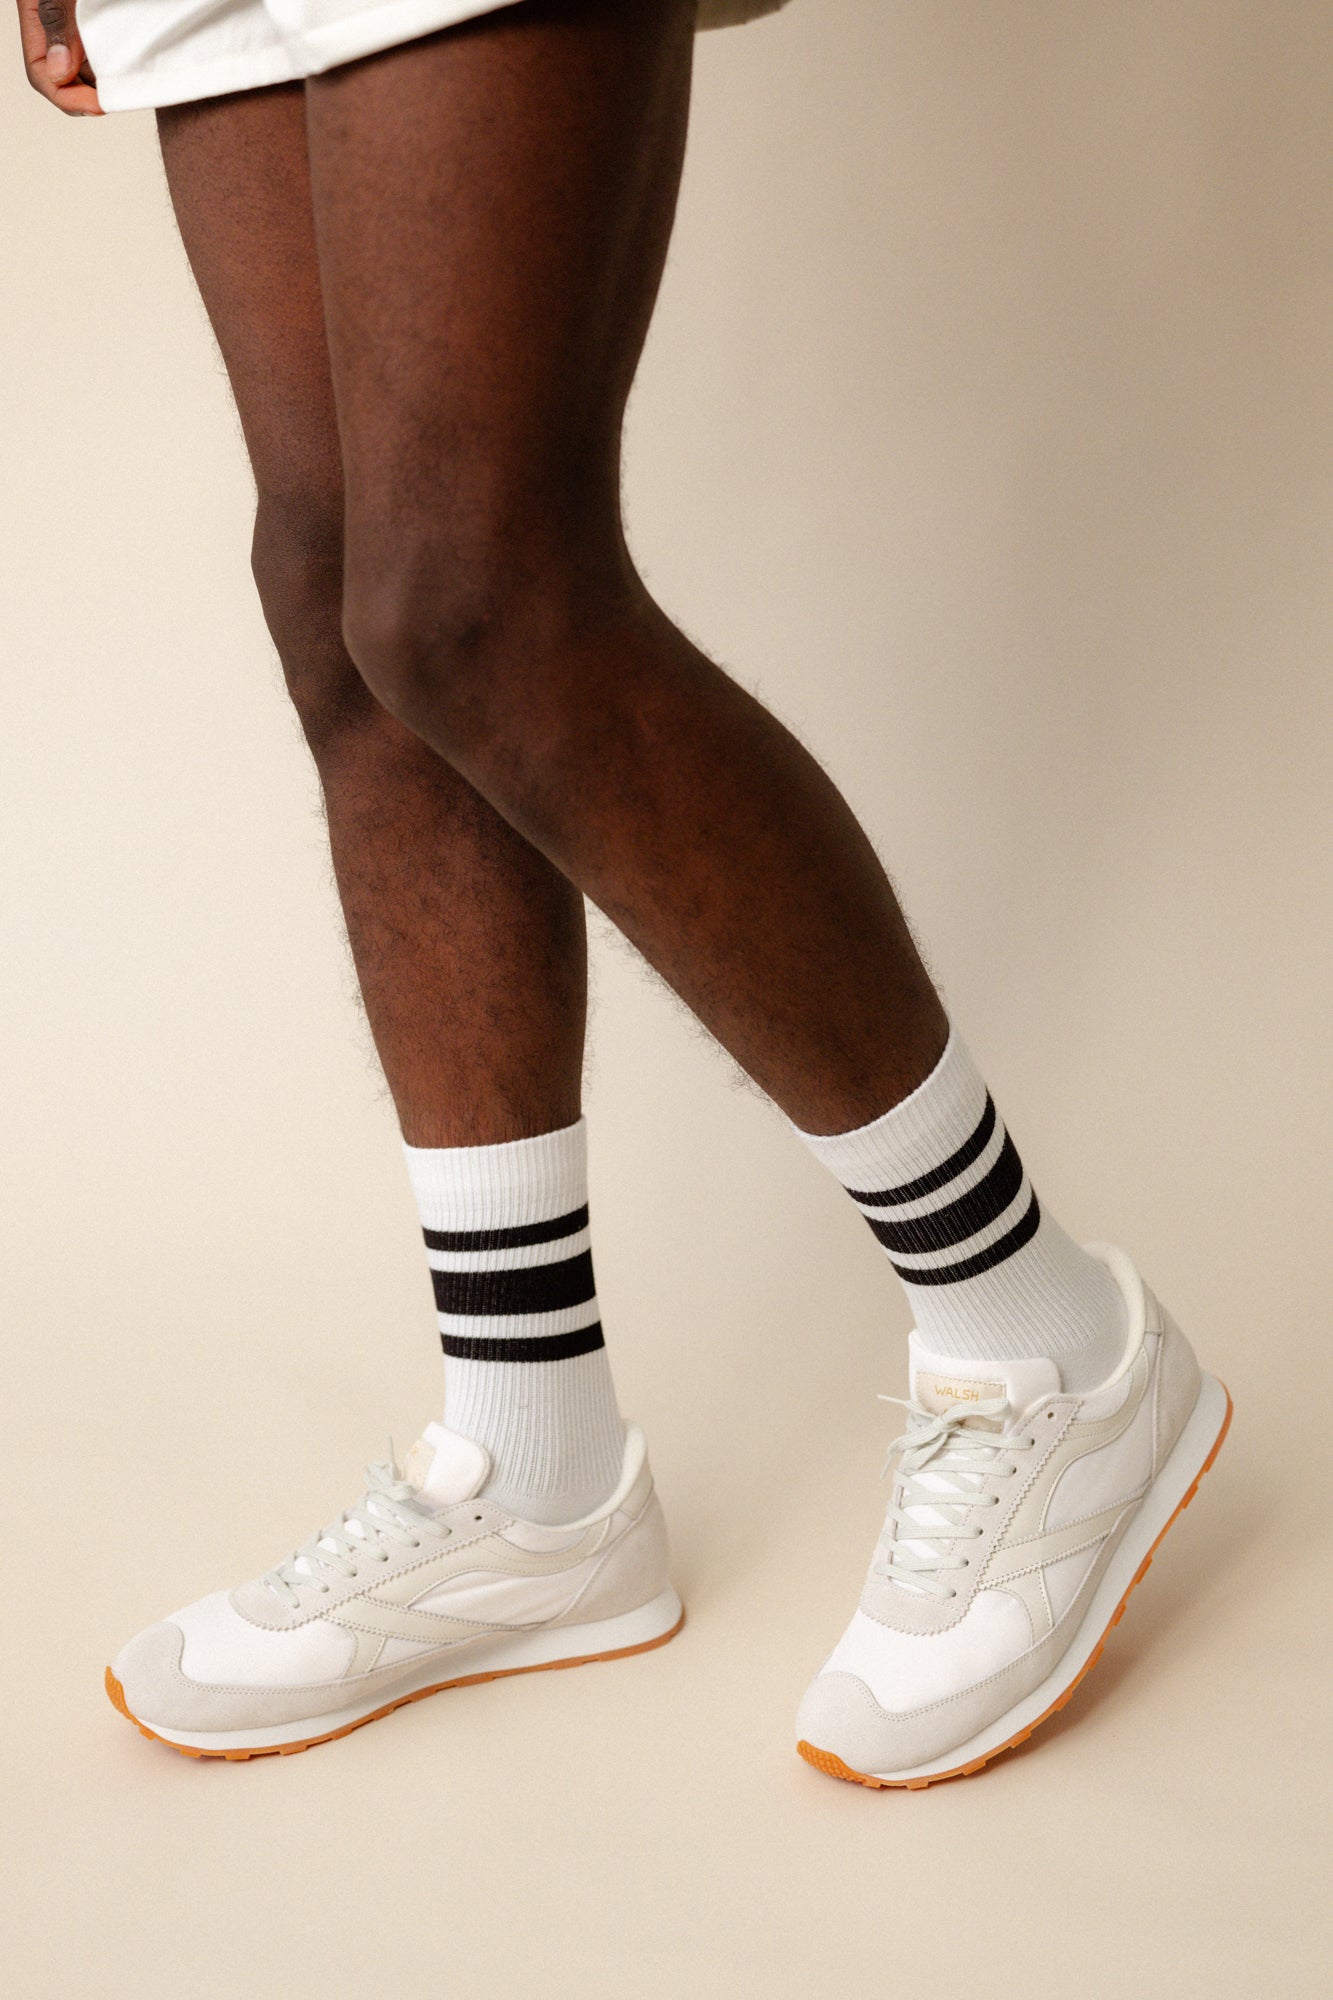 black model wearing calf length sports socks in white with black stripe with white Walsh x Community Clothing Beacon trainers